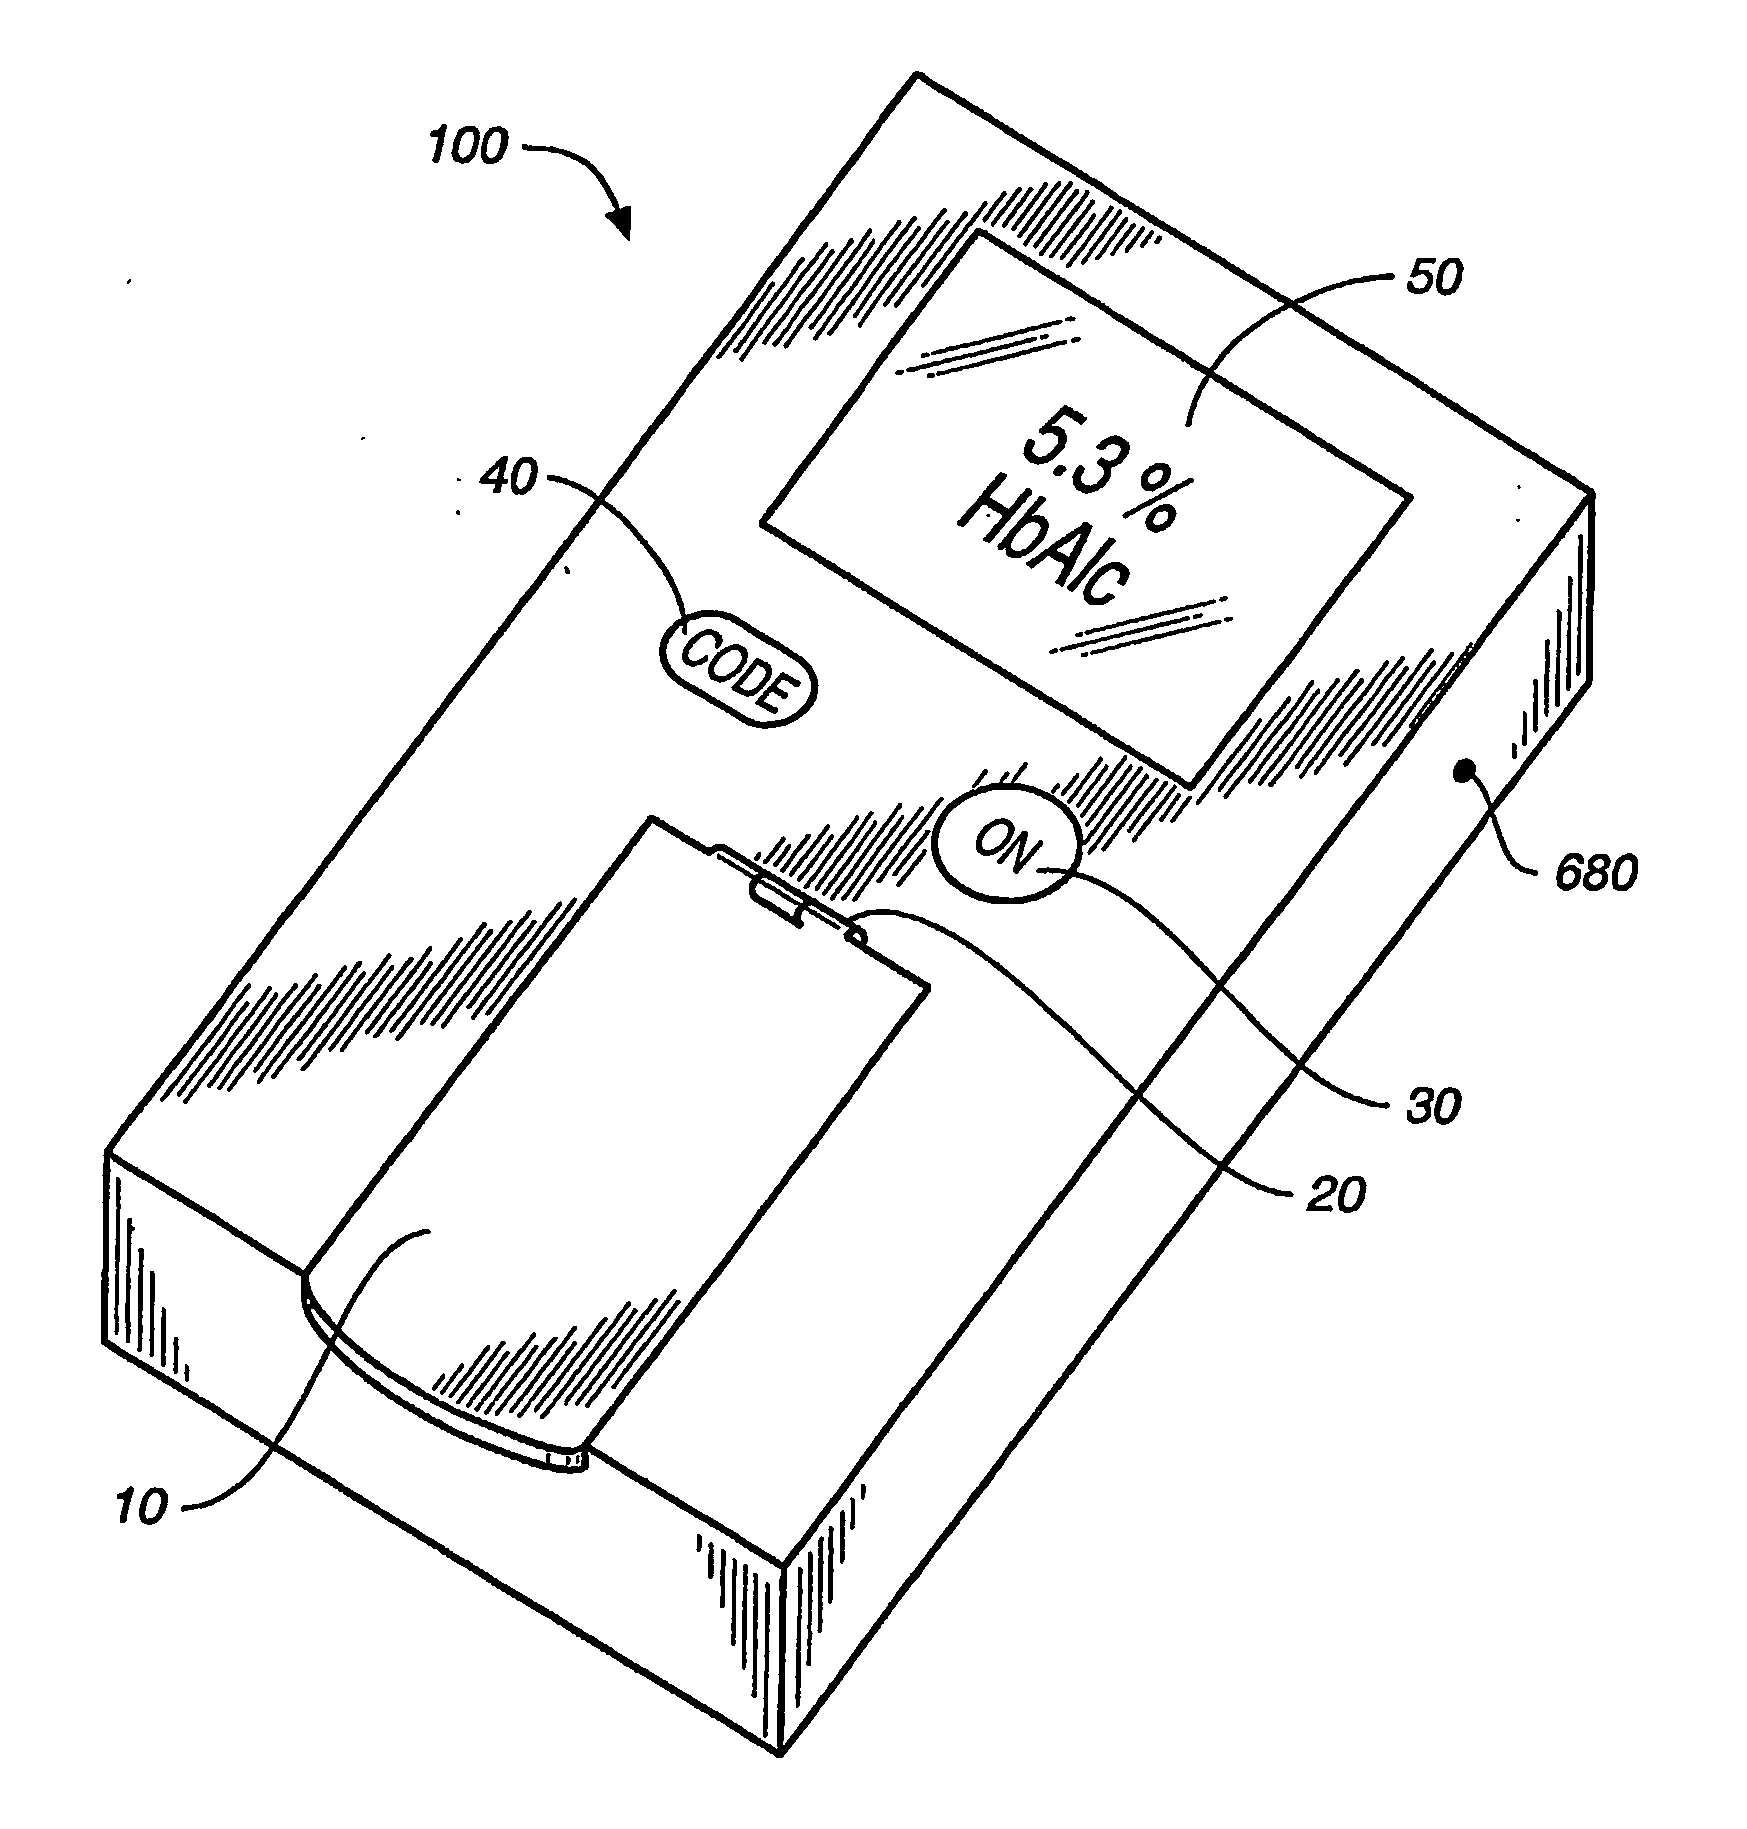 Assay device, system and method